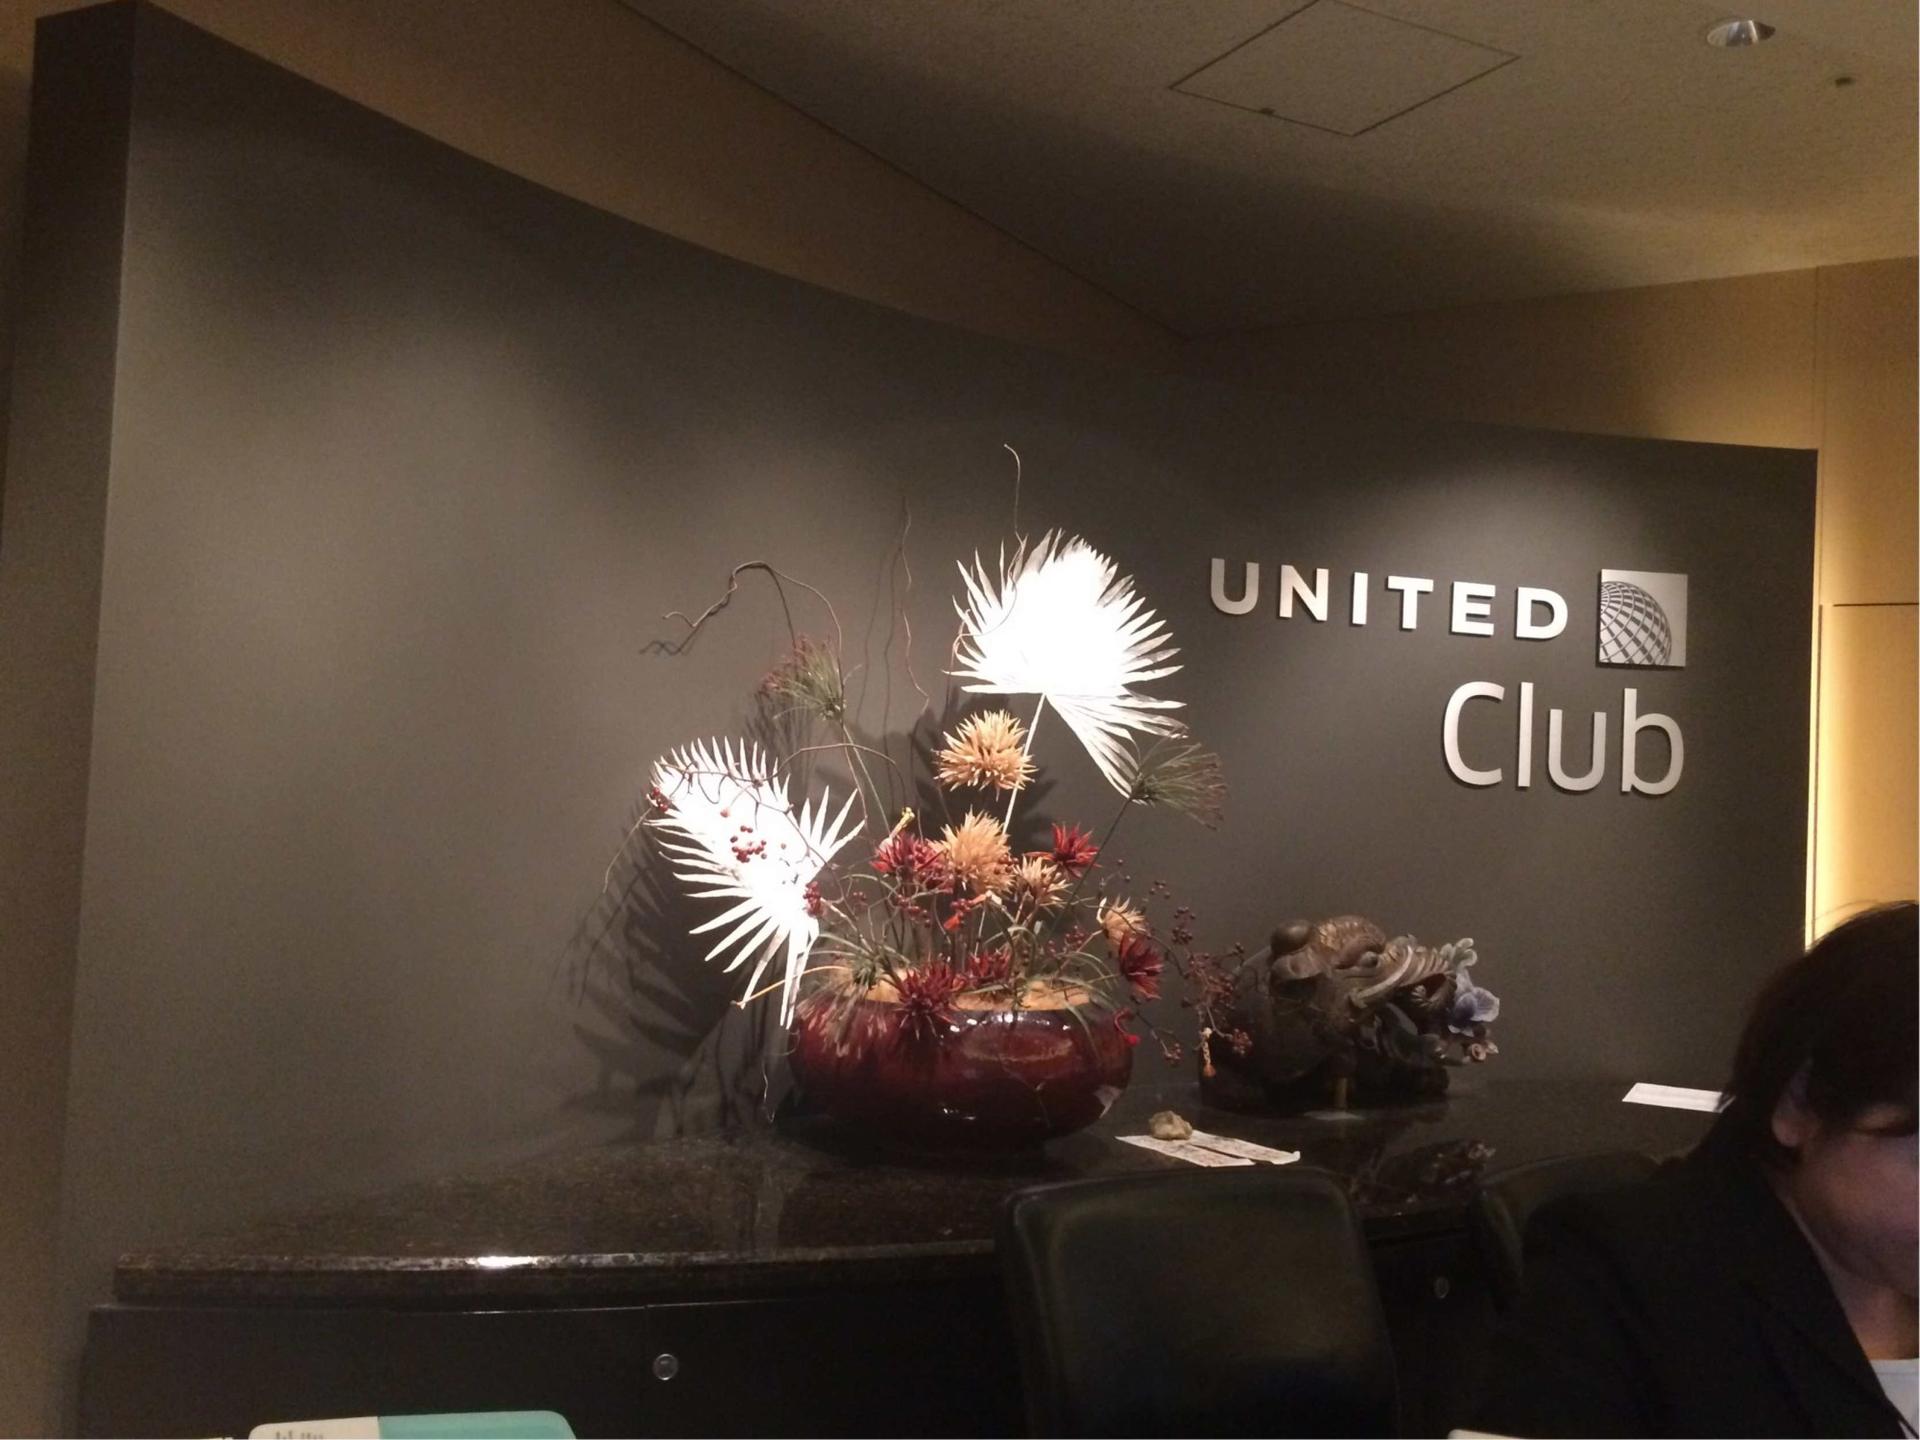 United Airlines United Club image 18 of 52